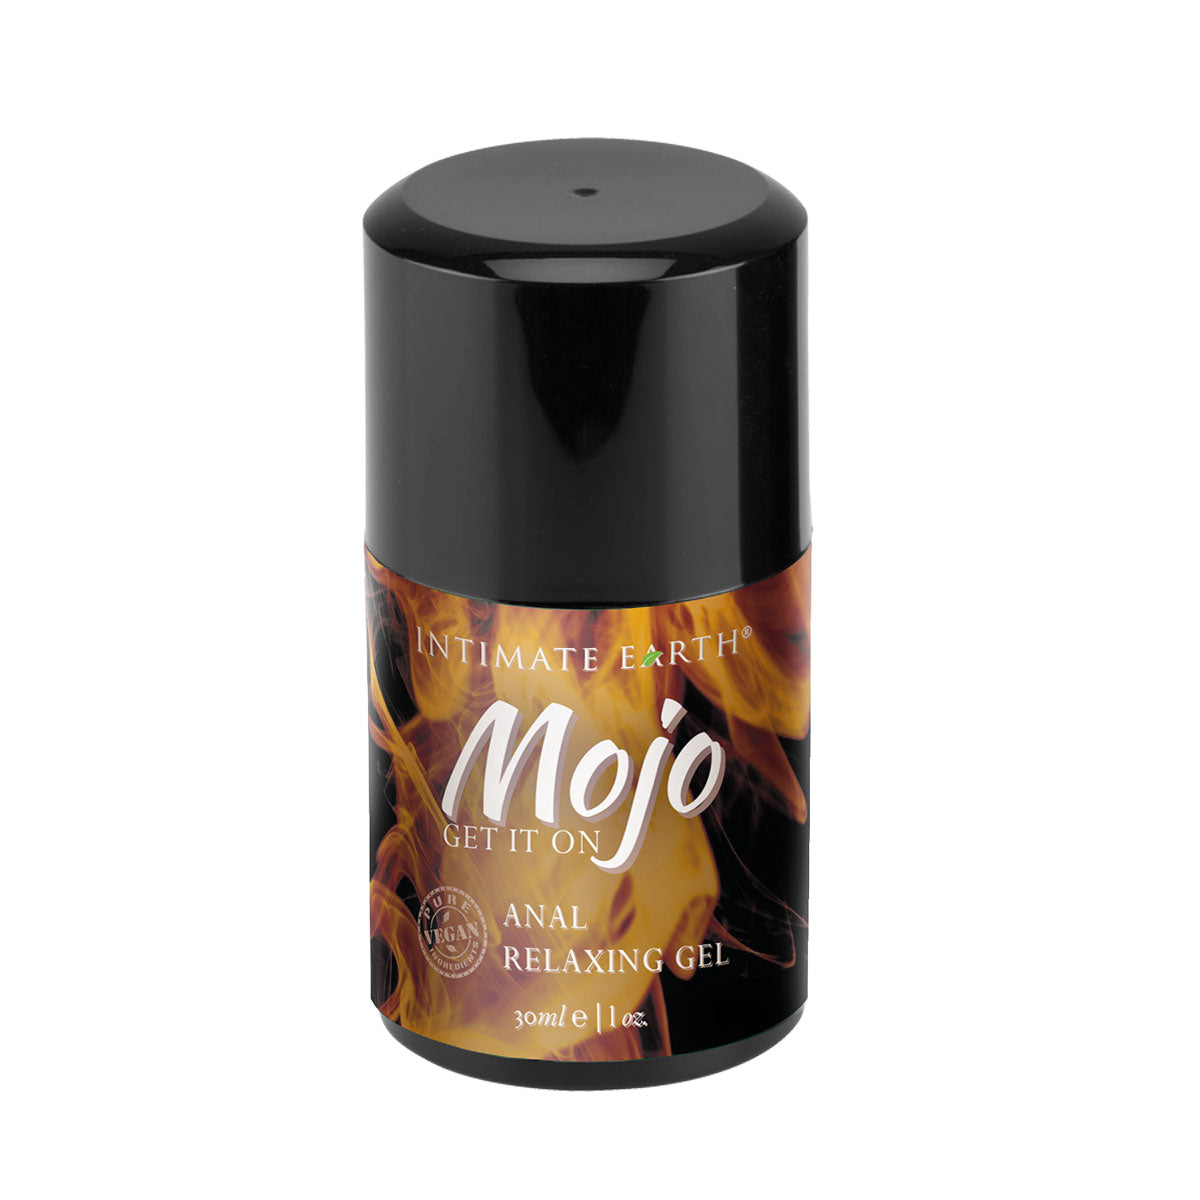 Intimate Earth MOJO Anal Relaxing Gel Clove Oil